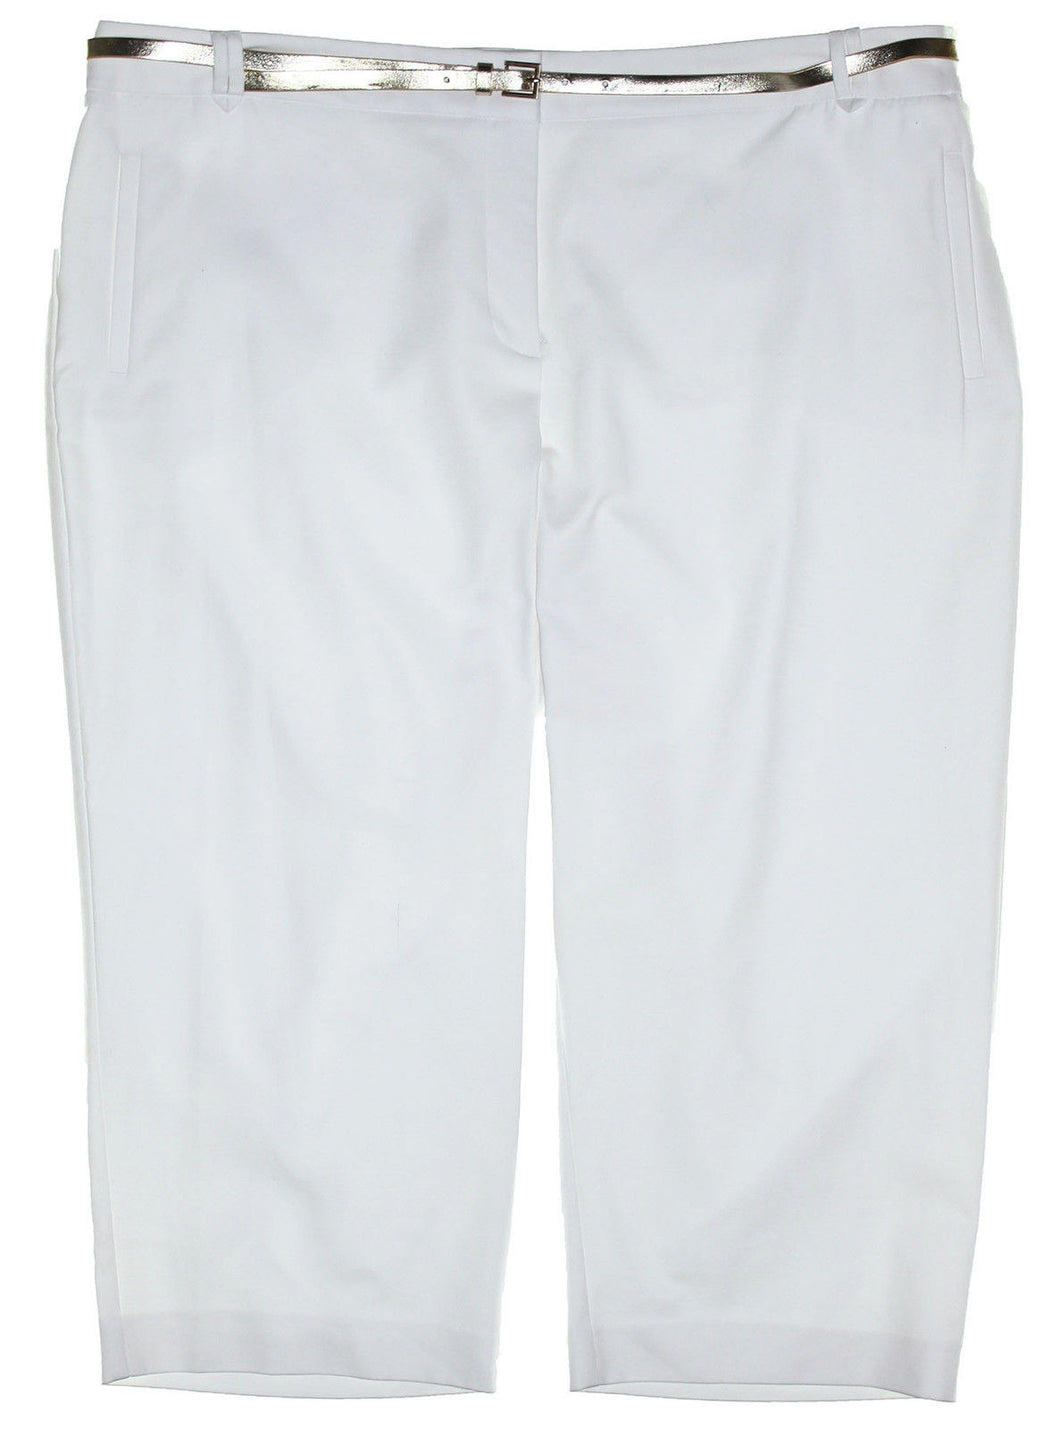 Charter Club White Tummy Slimming Classic Fit Belted Capri Pants